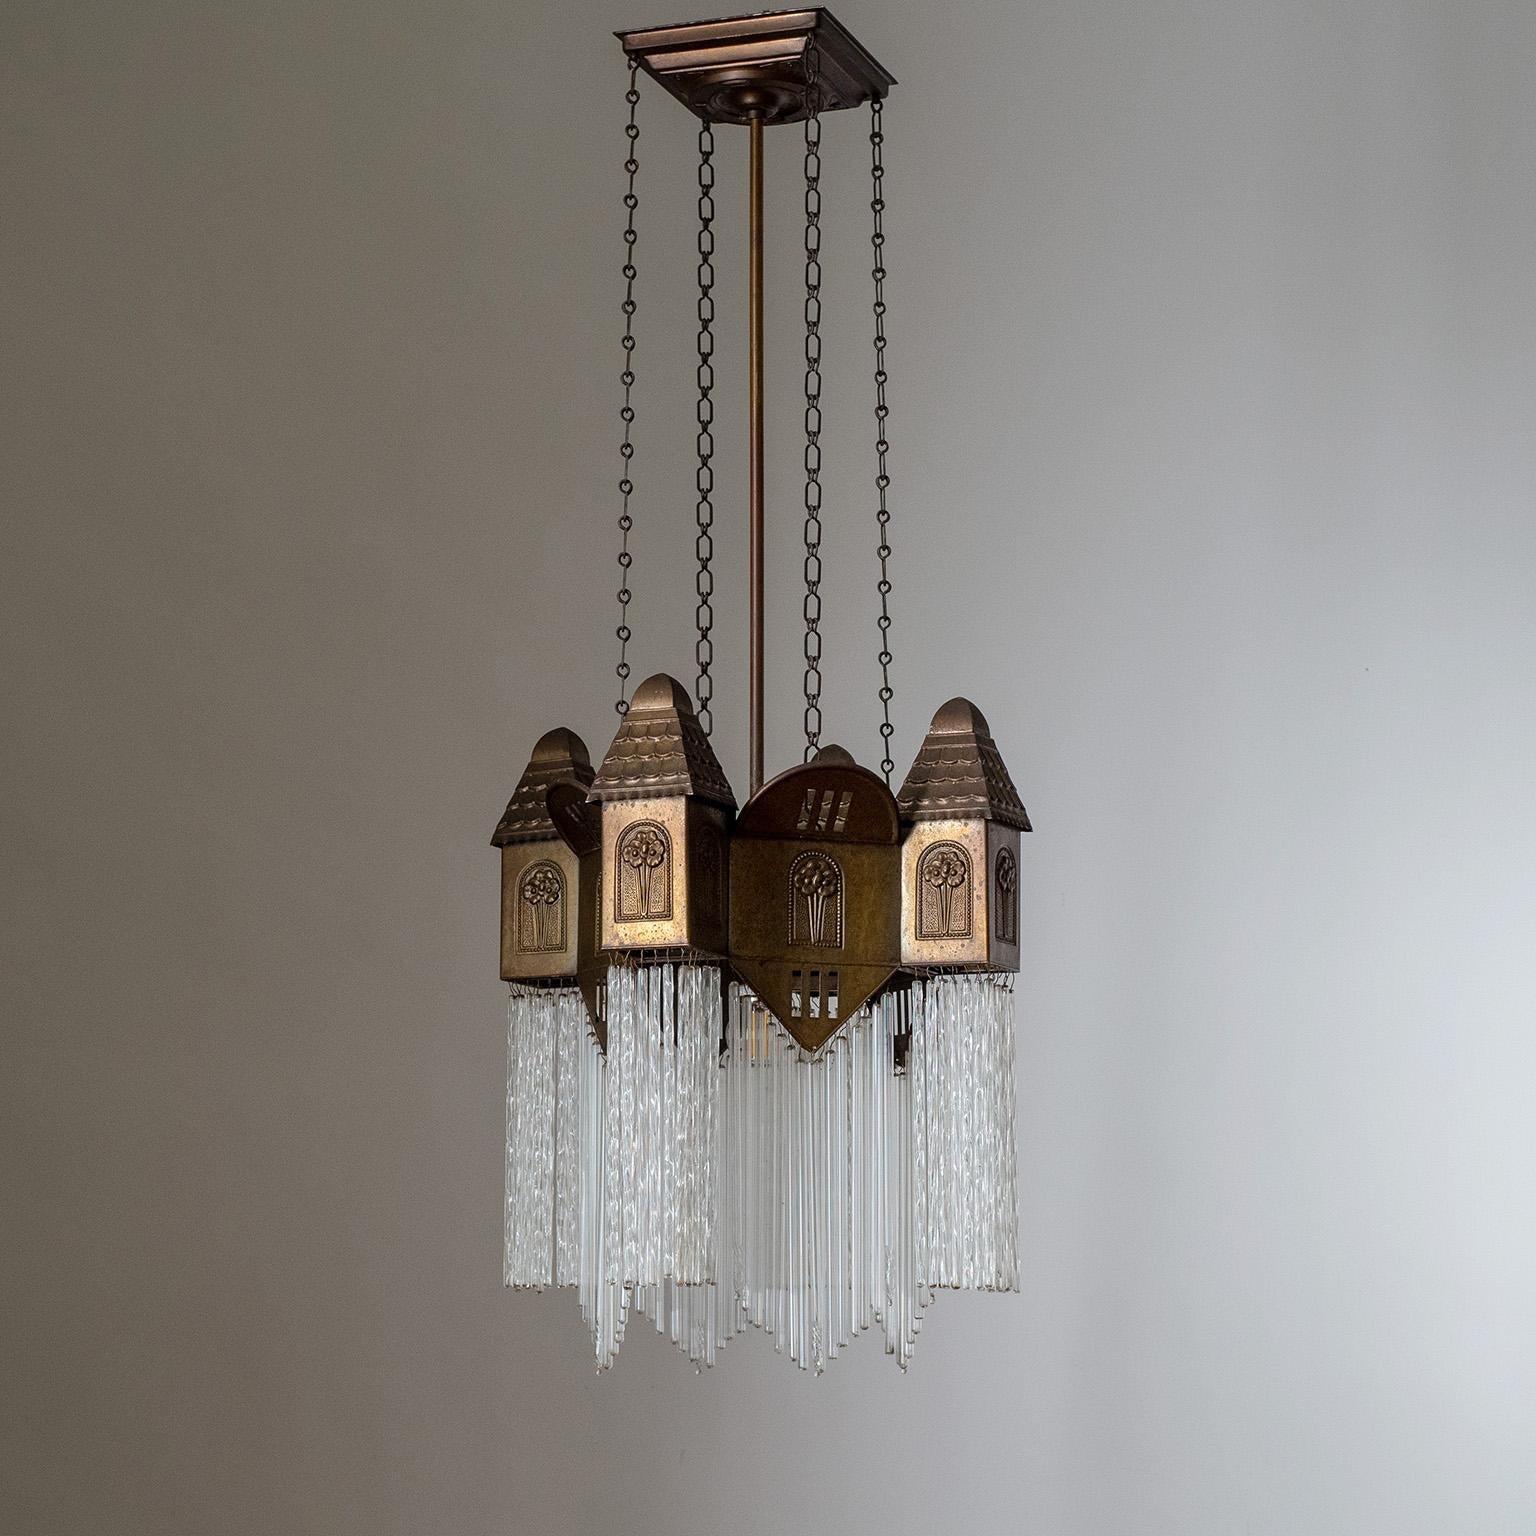 Rare Arts & Crafts suspension light from the early 20th century. Charming architectural body made of embossed sheet brass with three different types of glass rods. One original brass and ceramic E27 socket with new wiring.
Measures: Height 93cm